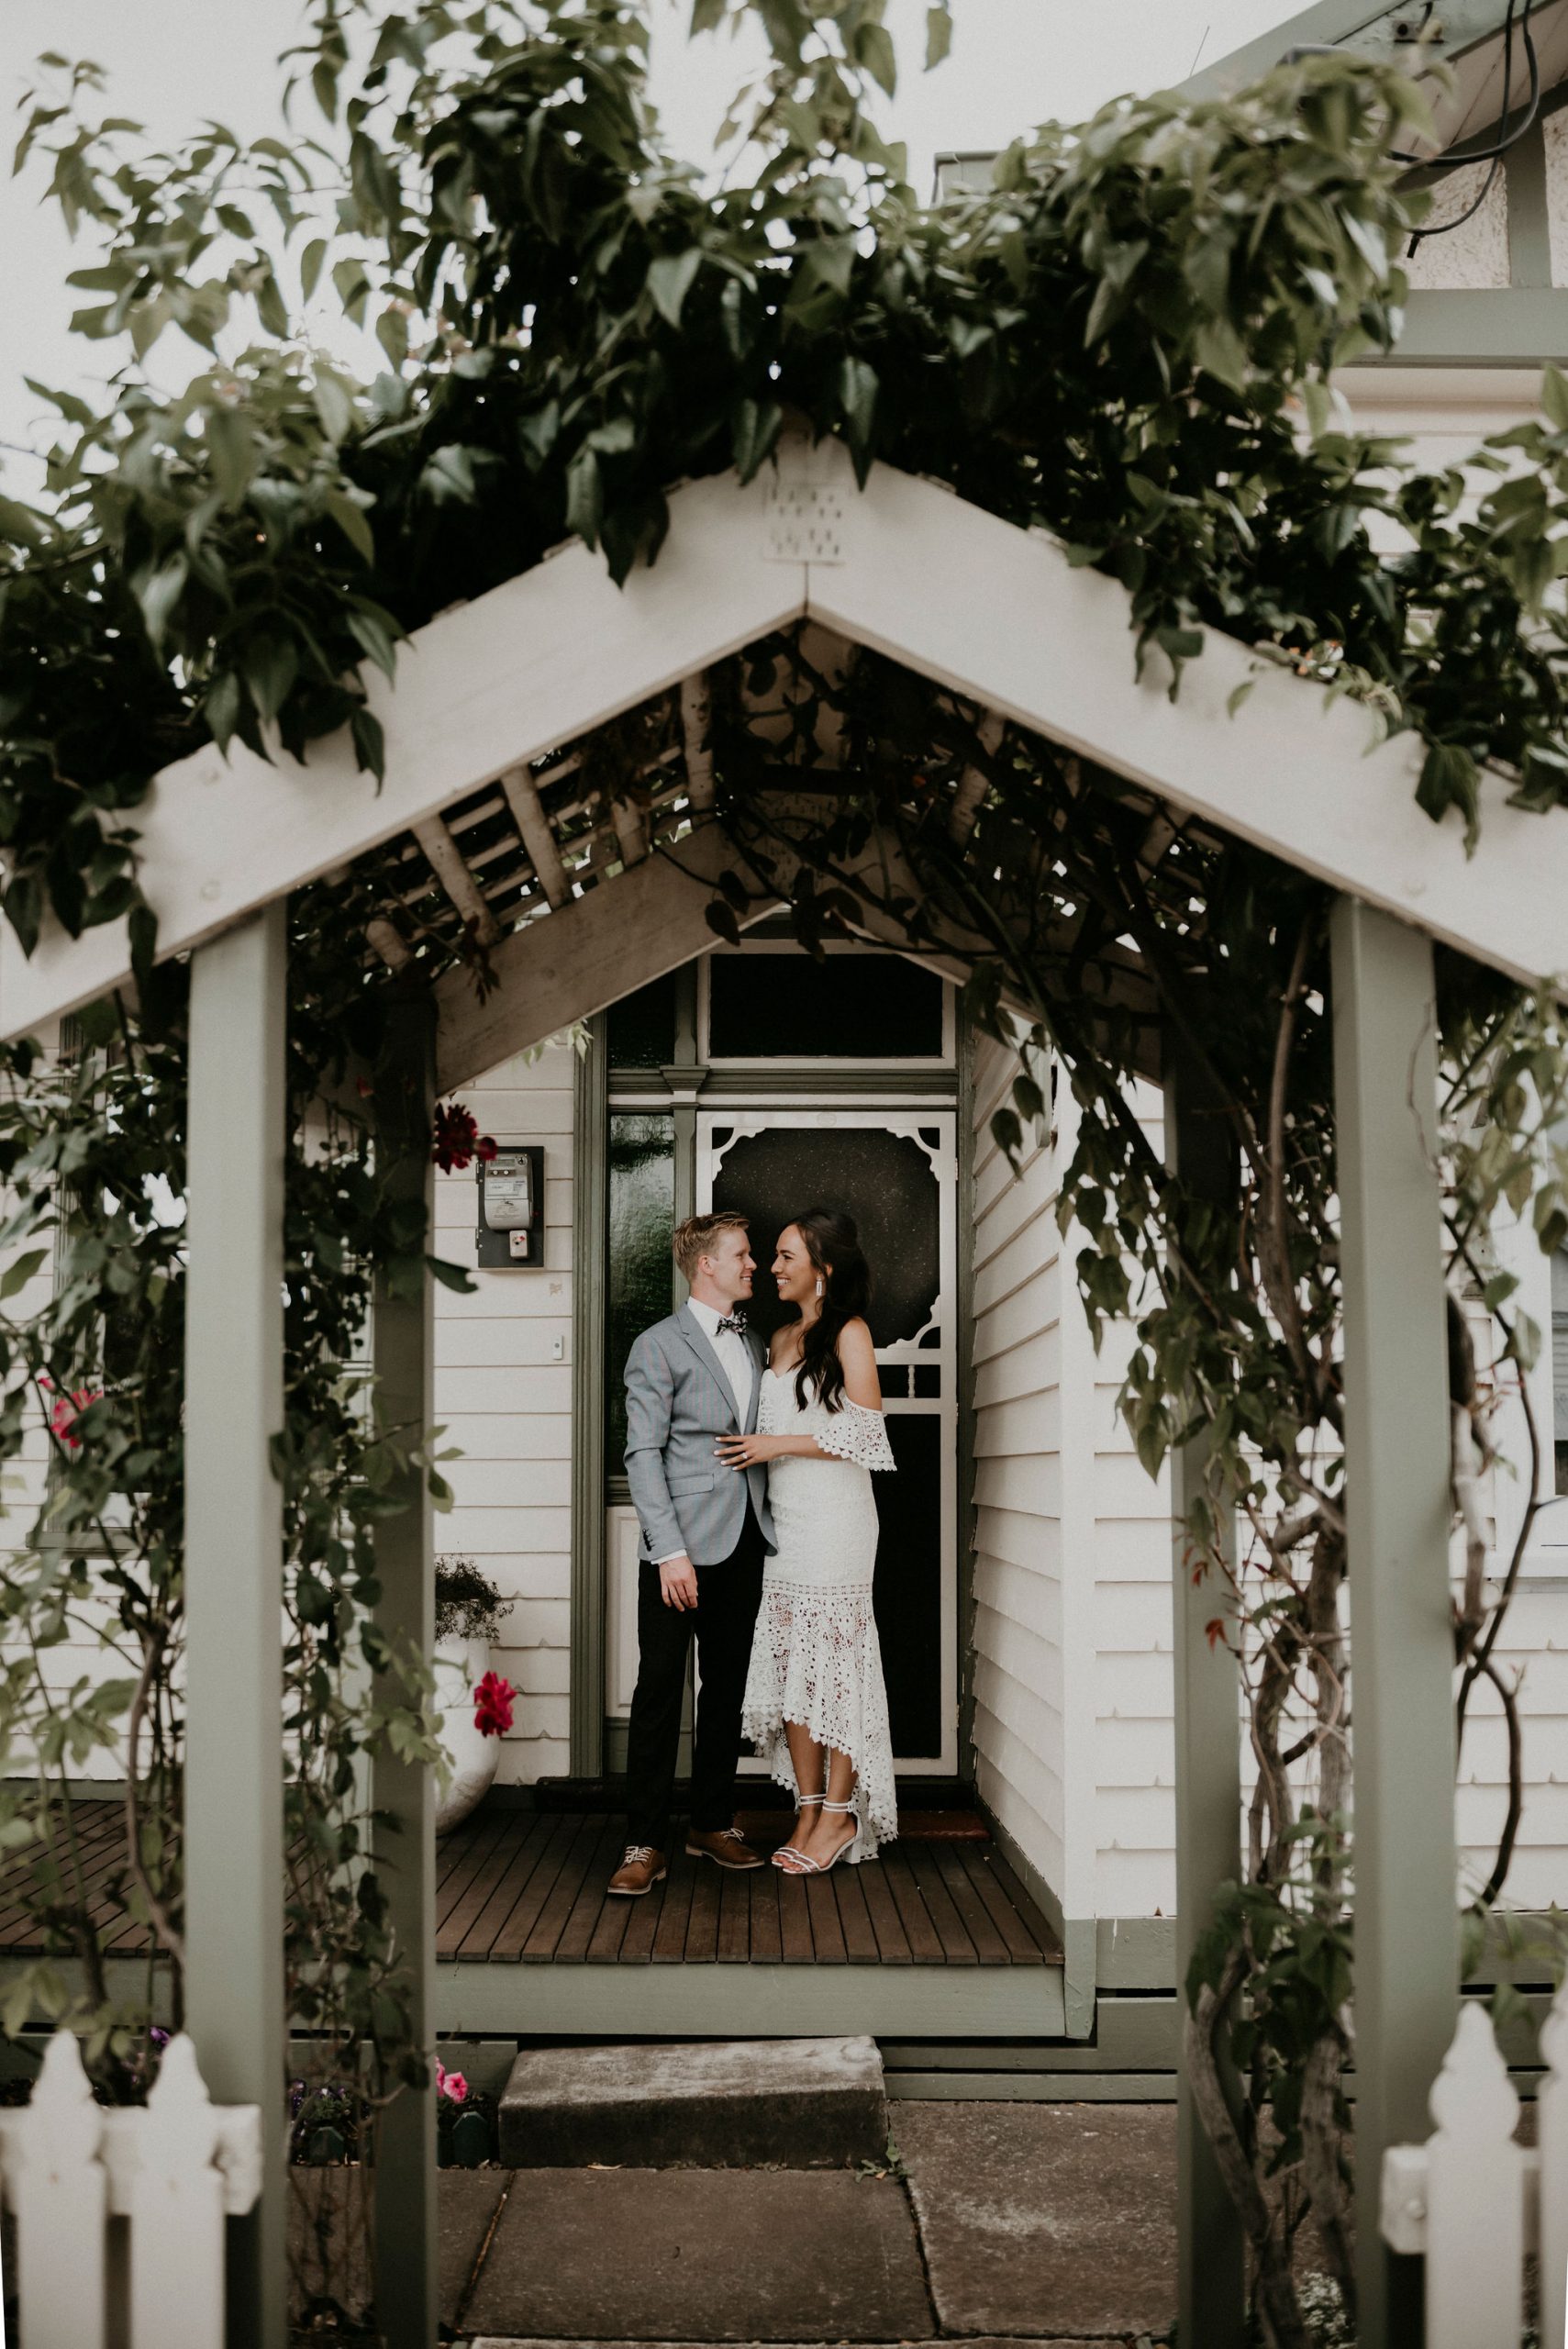 Lets-Elope-Melbourne-Celebrant-Photographer-Elopement-Package-Victoria-Sarah-Matler-Photography-Elope-at-Home-Footscray-weddings-intimate-18